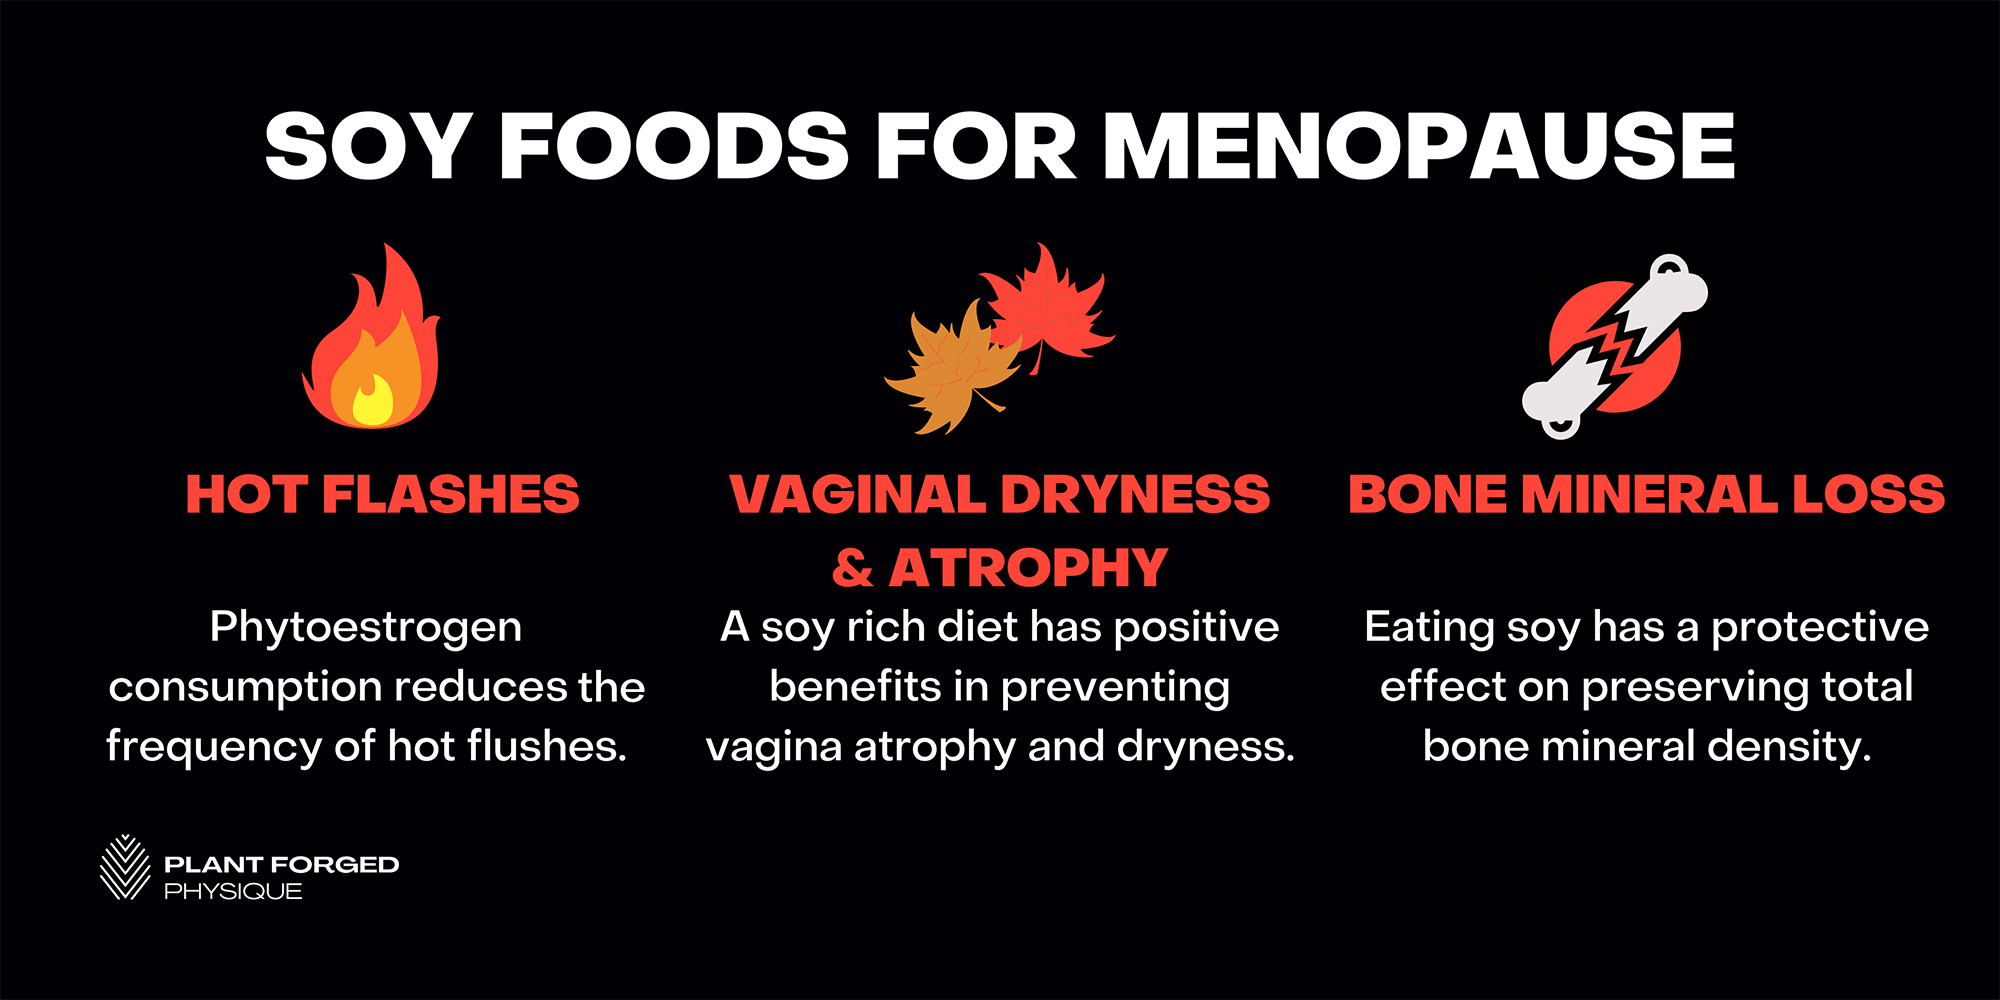 Soy foods for menopause